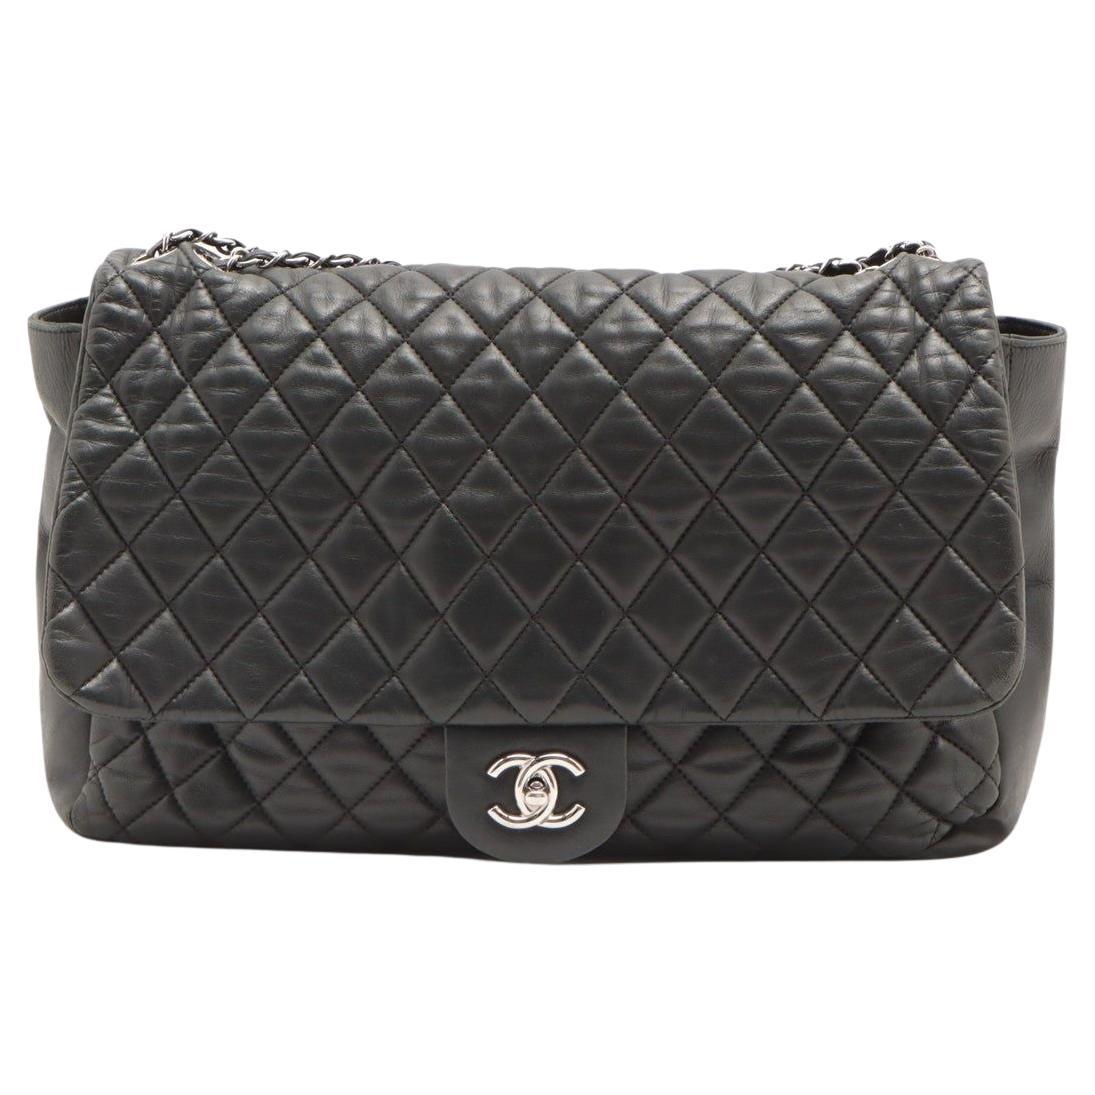 Black quilted soft Lambskin leather Chanel Jumbo Single Flap